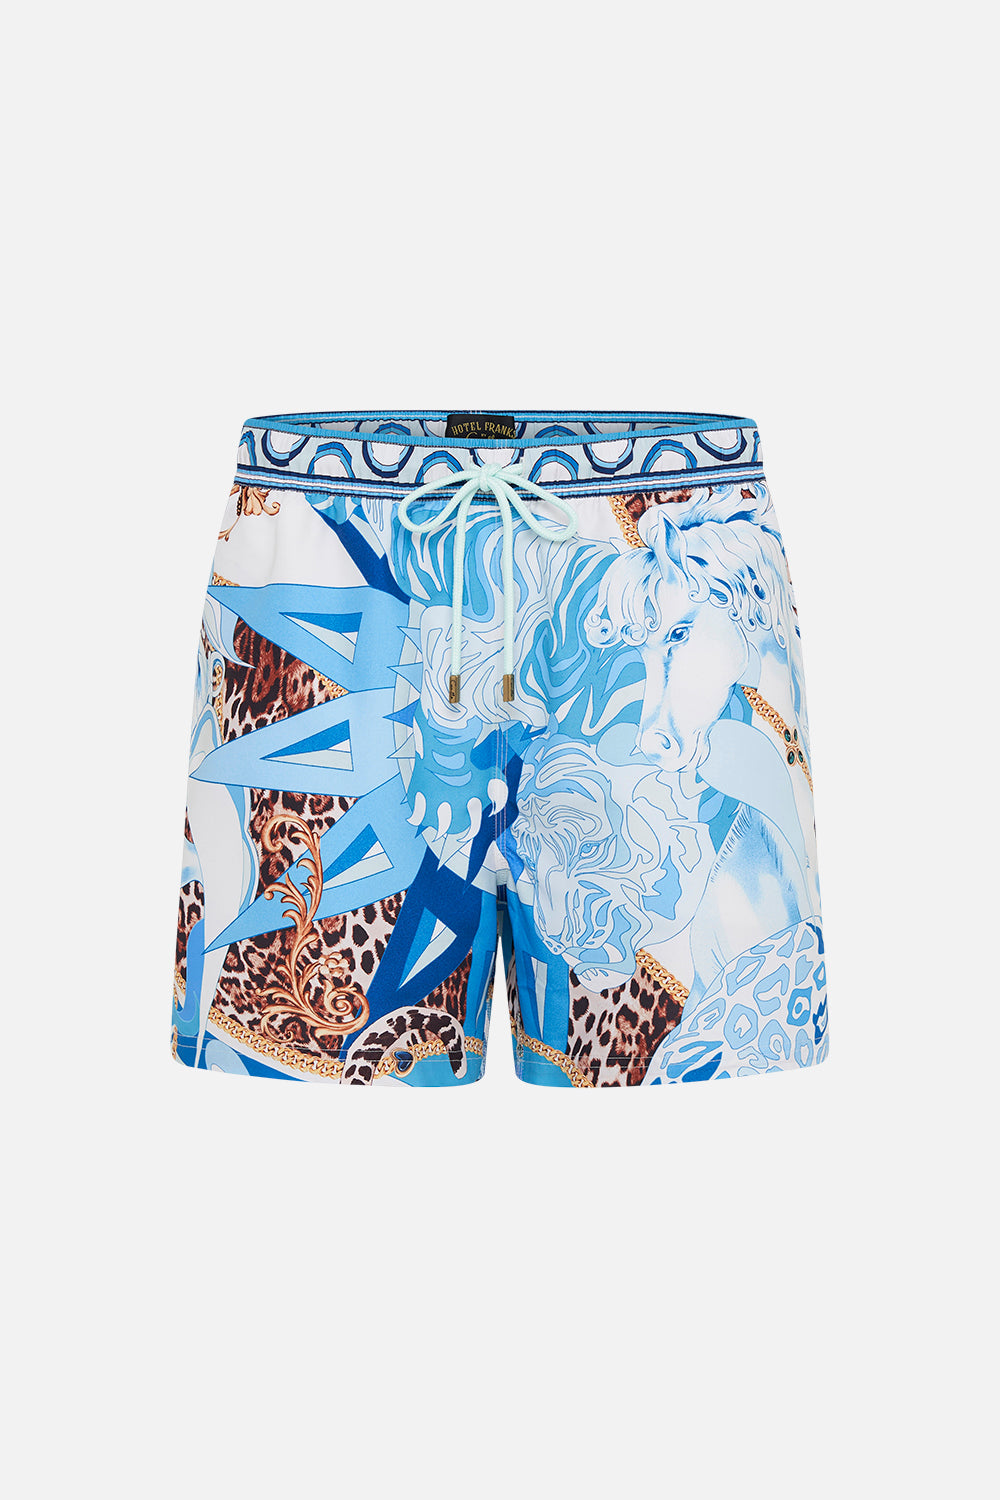 Product view of Hotel Franks By CAMILLA mens boardshort in Sky Cheetah print 